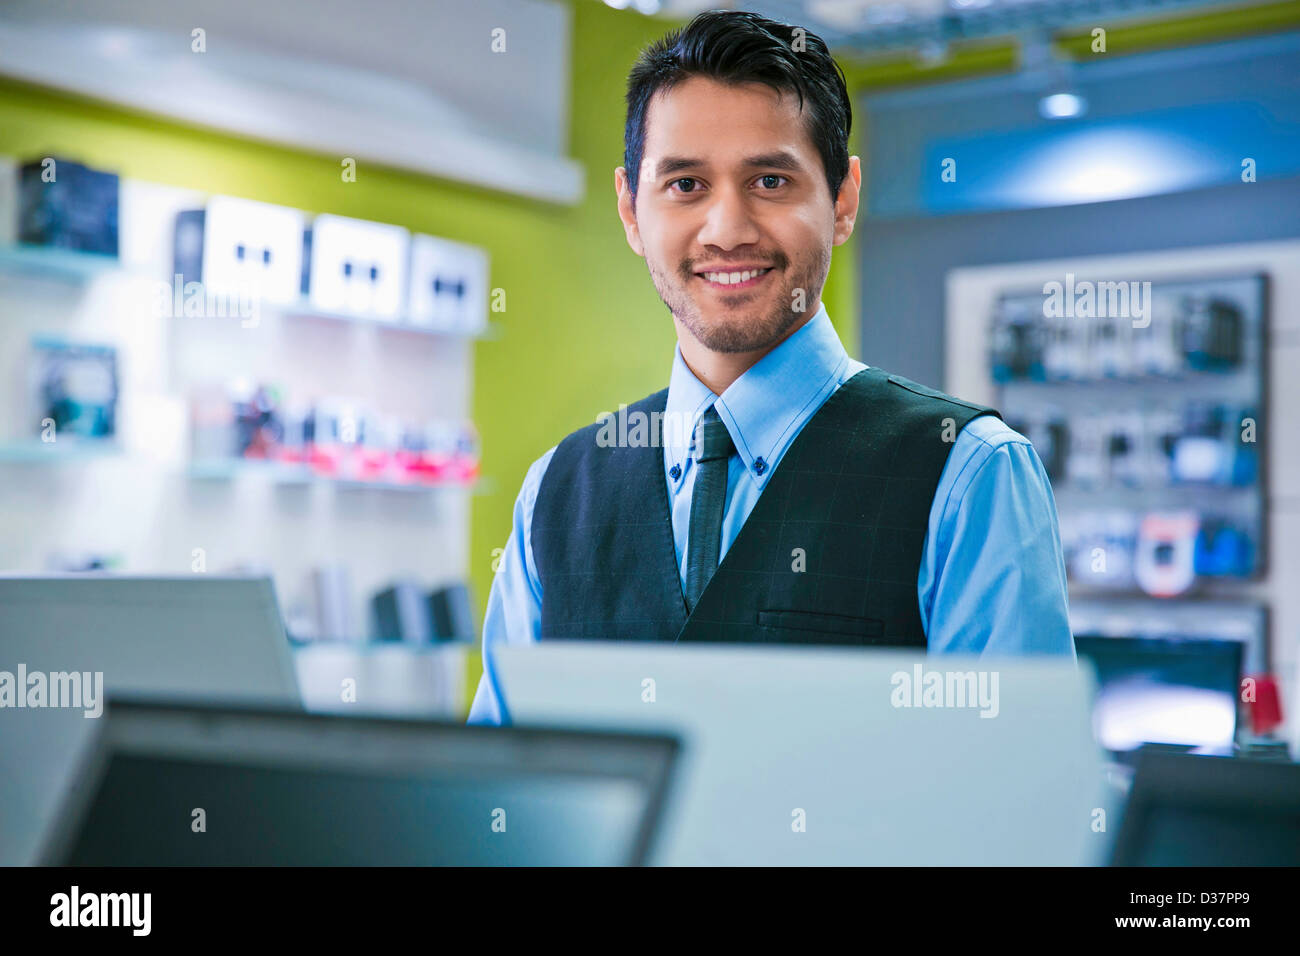 Salesman smiling in store Stock Photo